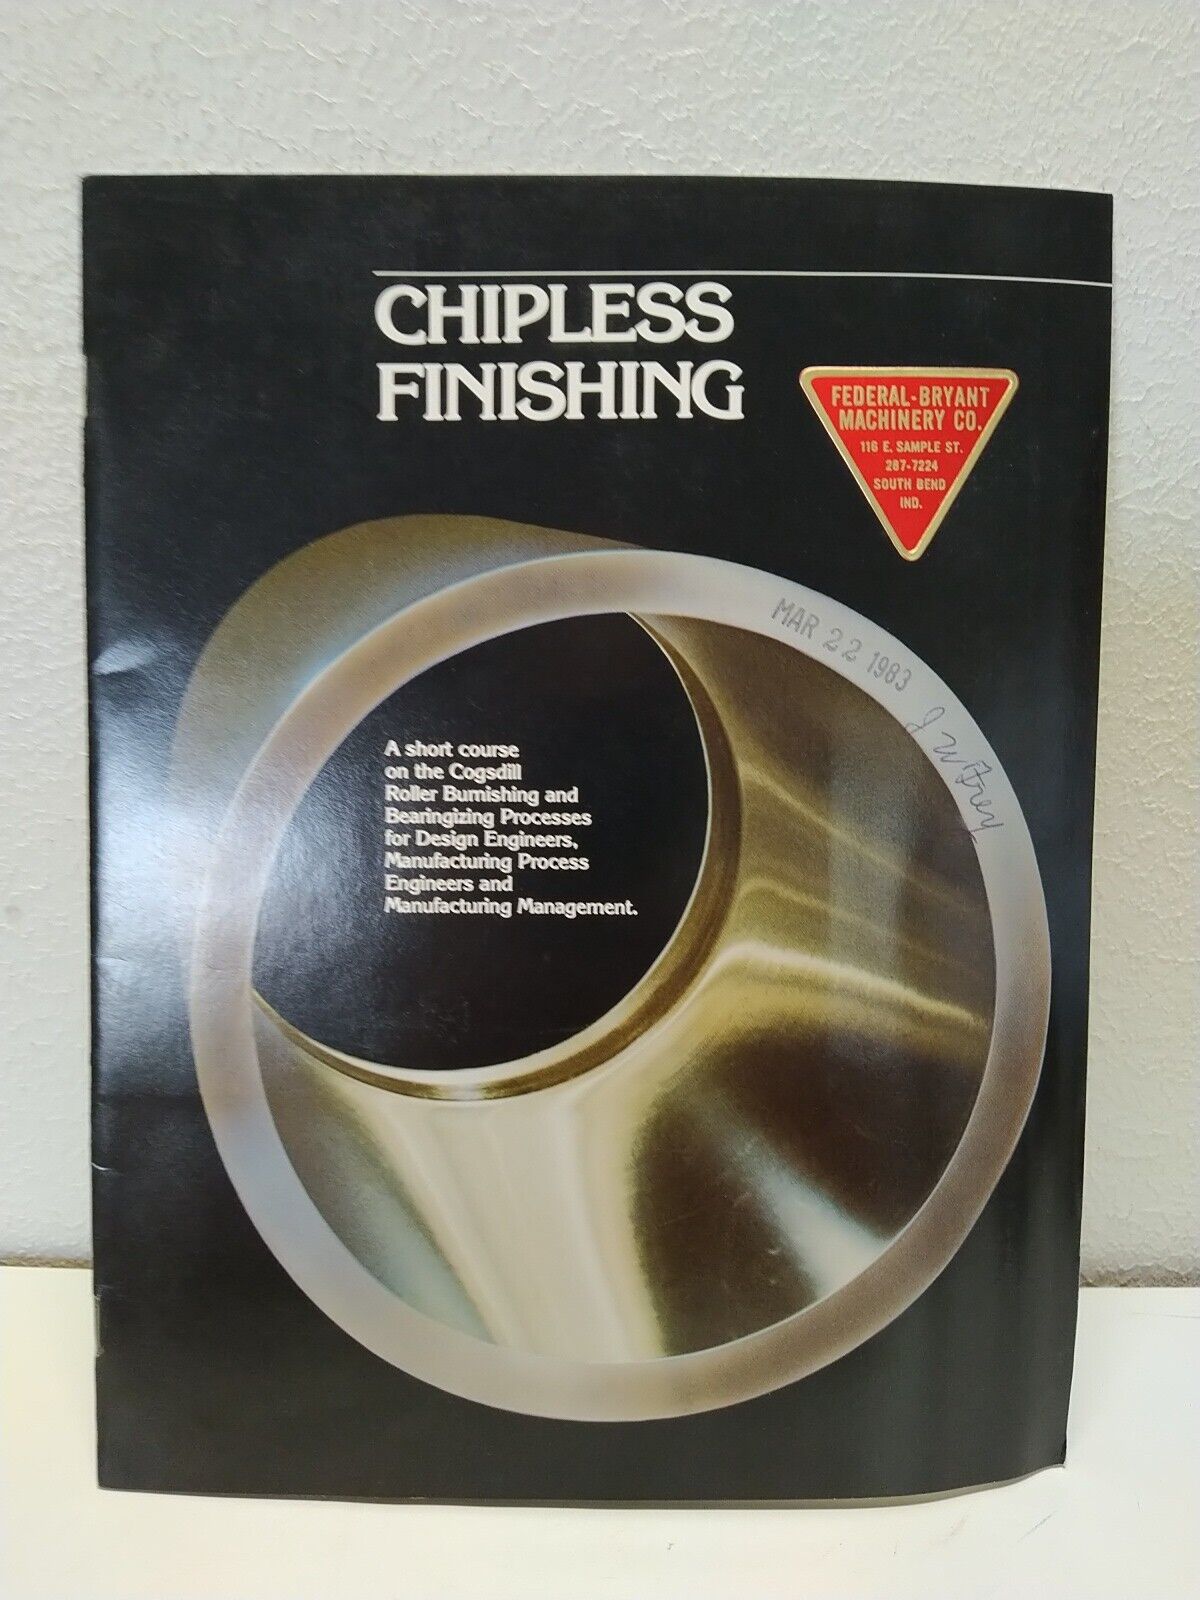 Chipless Finishing Federal Bryant Machinery Cogsdill Roller Bumishing 1980 PB